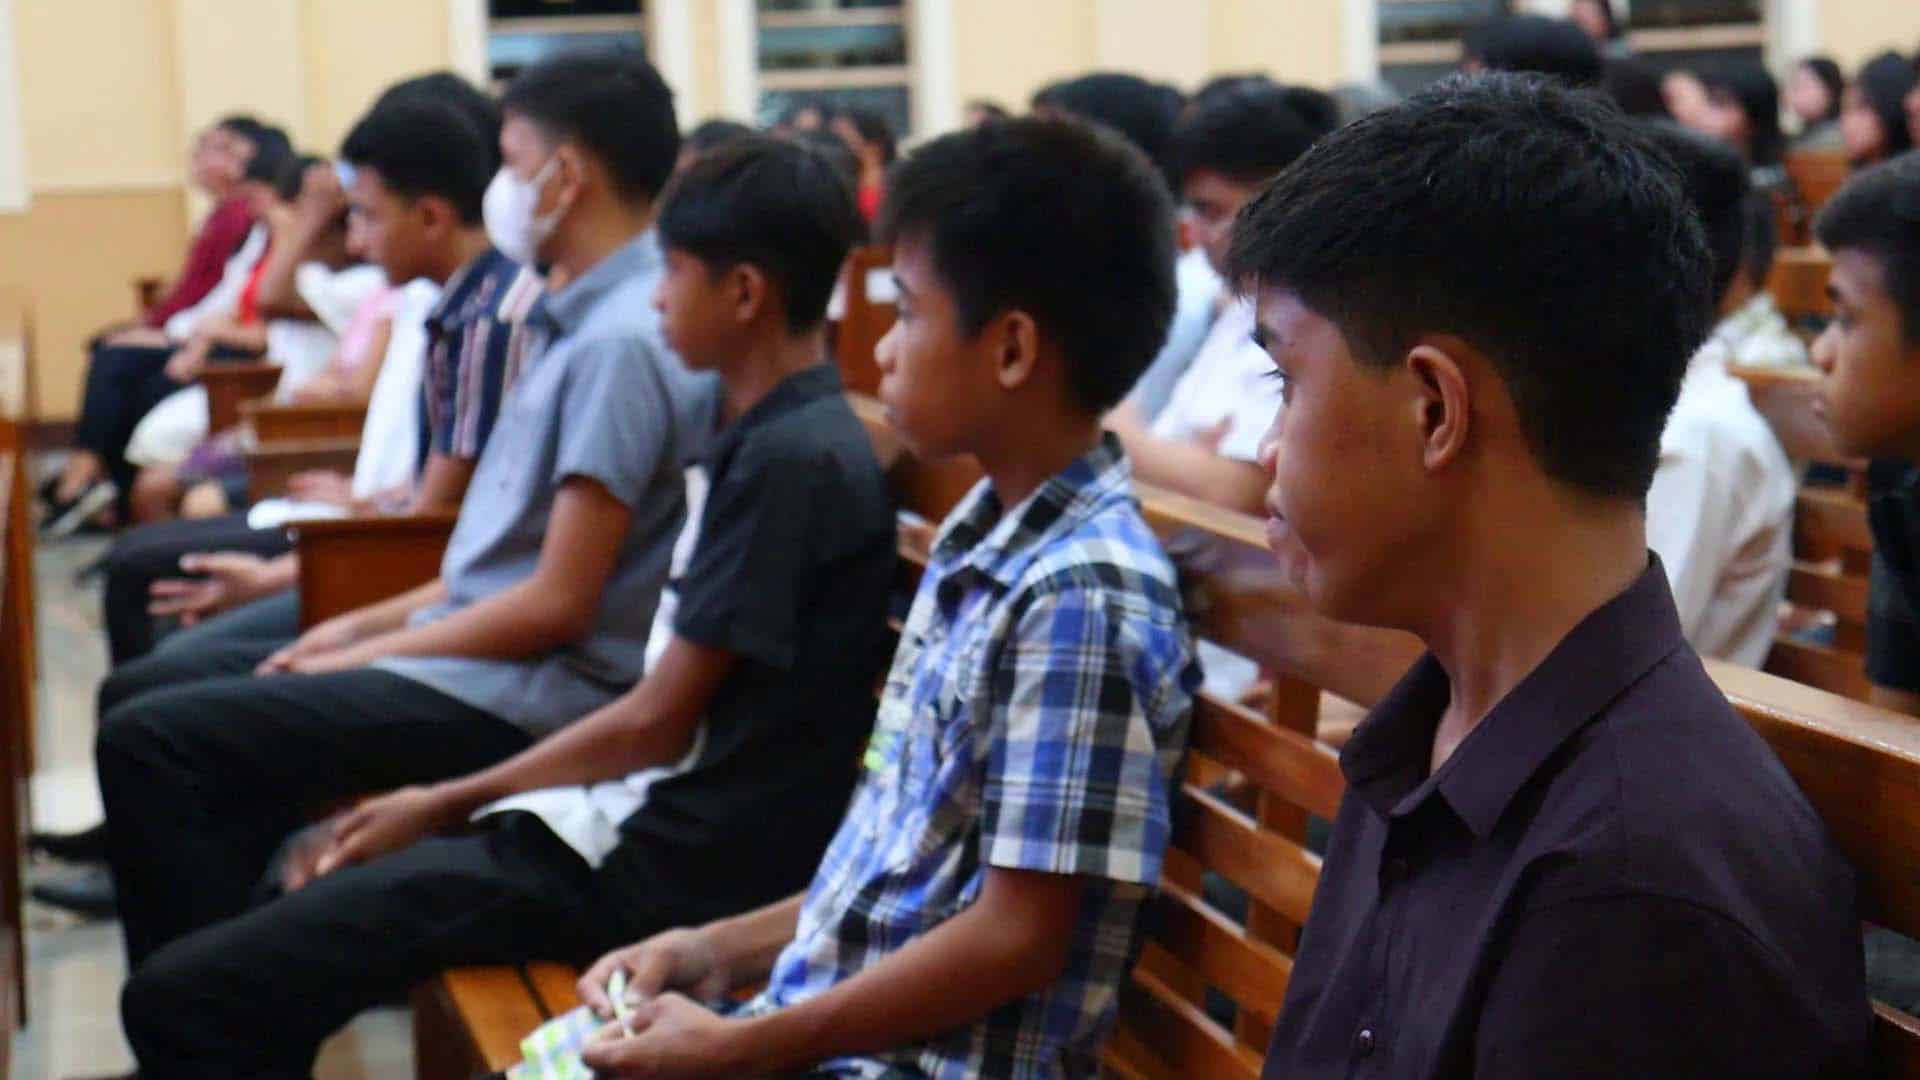 Youth in Naga City, Camarines Sur lead evangelical missions